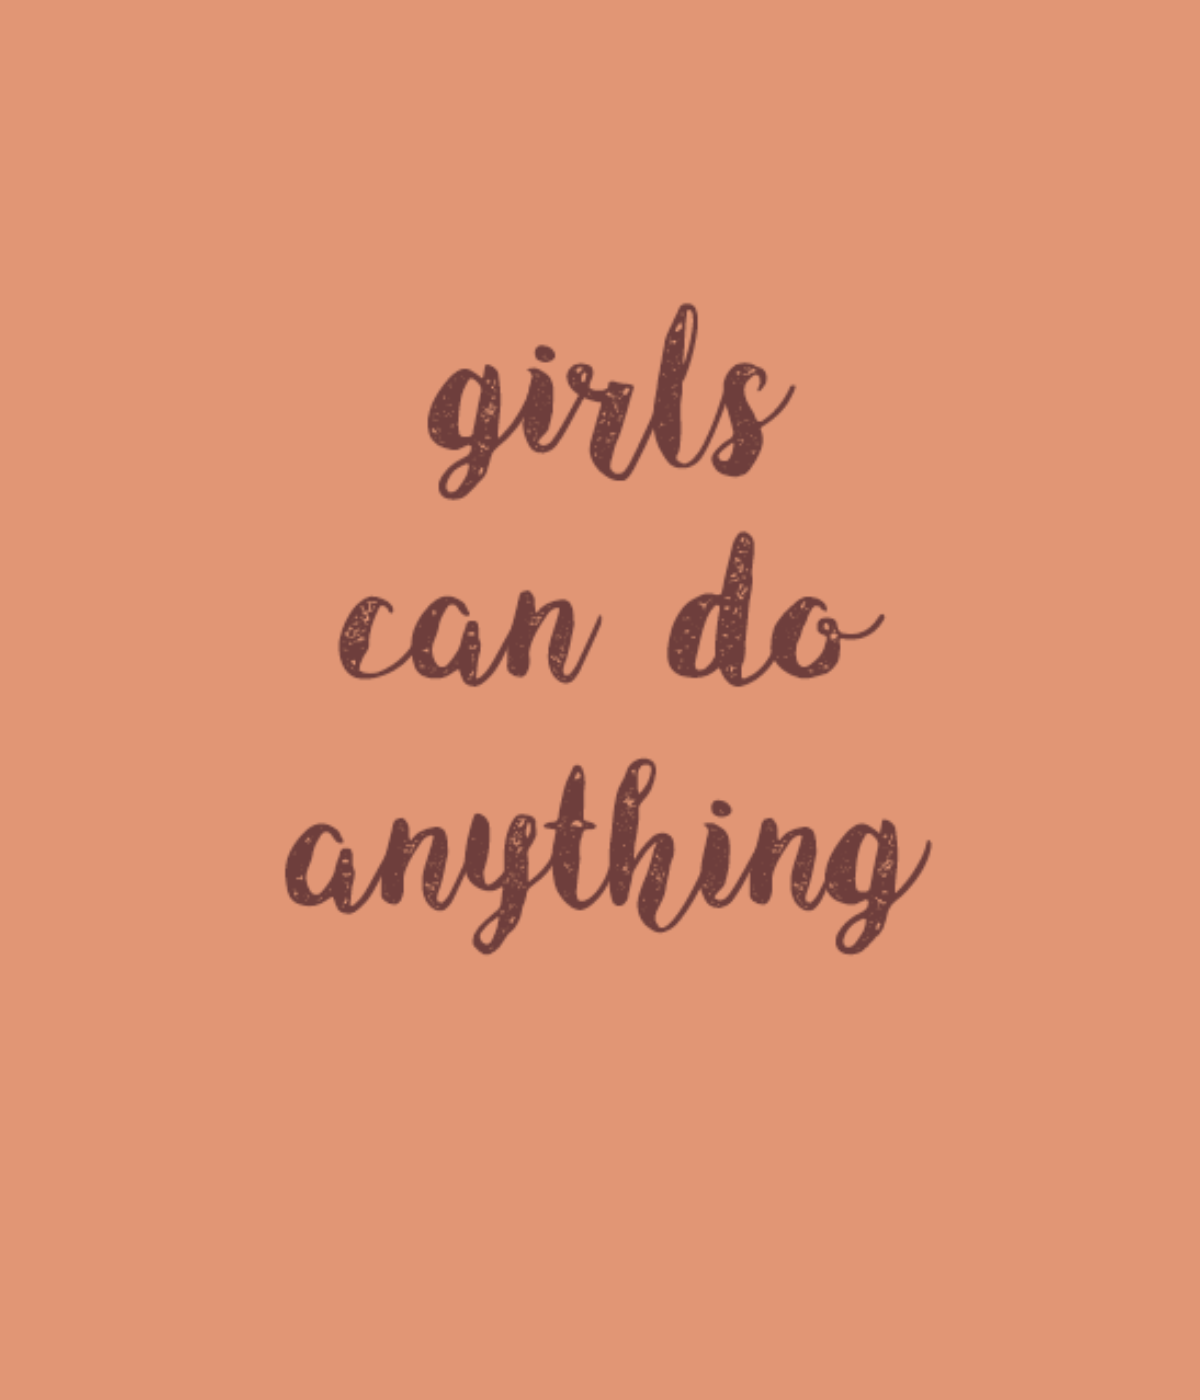 girls can do anything